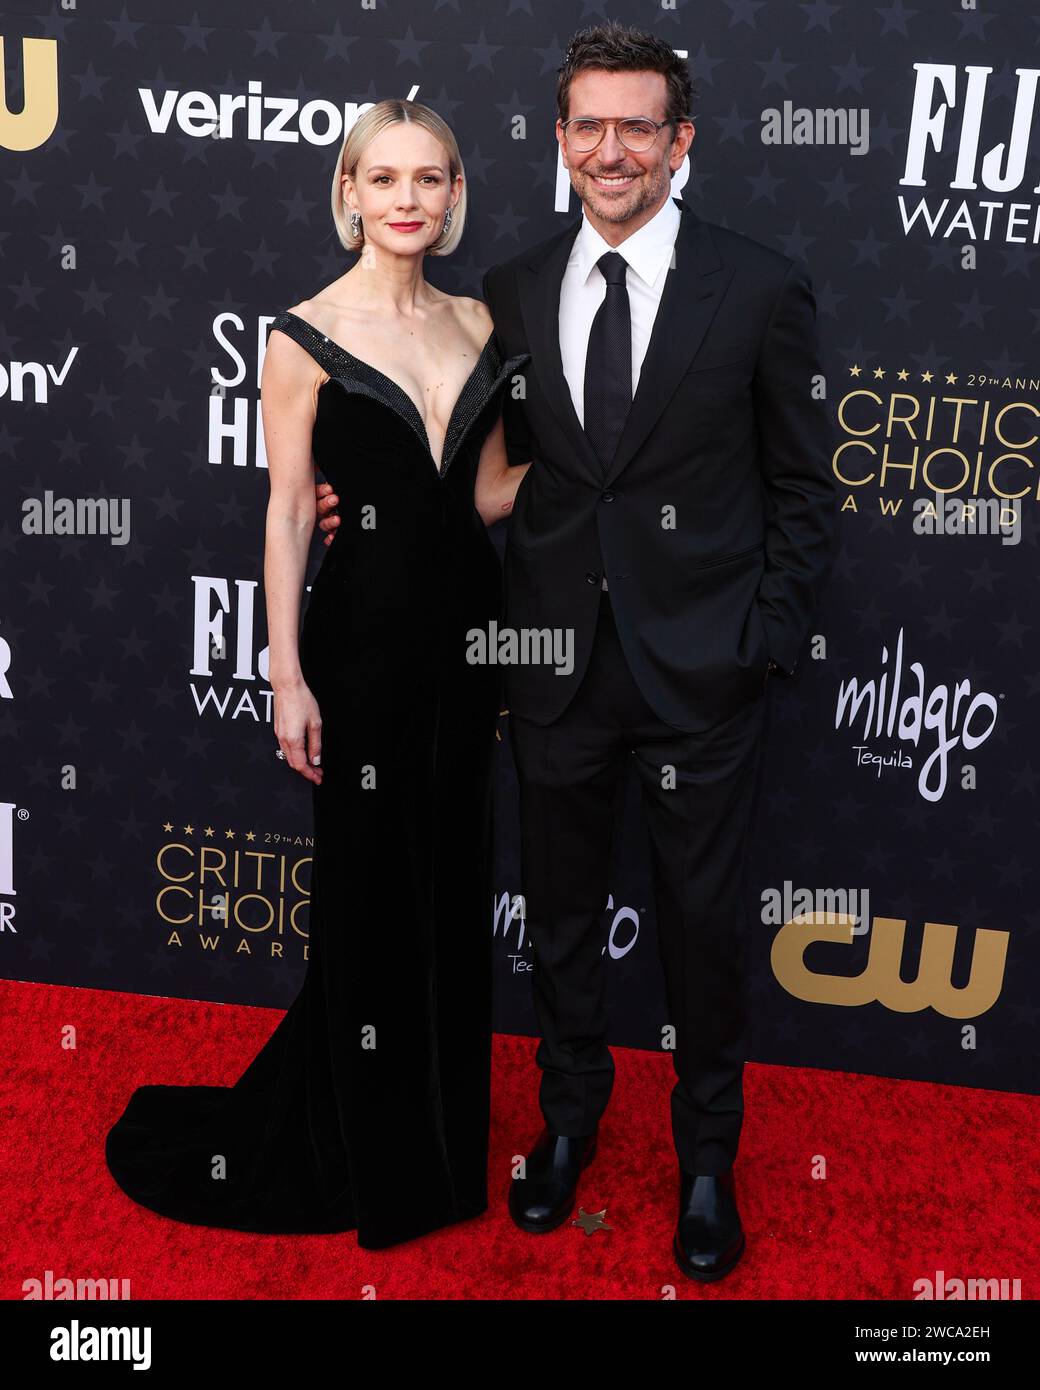 SANTA MONICA, LOS ANGELES, CALIFORNIA, USA - JANUARY 14: Carey Mulligan and Bradley Cooper arrive at the 29th Annual Critics' Choice Awards held at The Barker Hangar on January 14, 2024 in Santa Monica, Los Angeles, California, United States. (Photo by Xavier Collin/Image Press Agency) Stock Photo